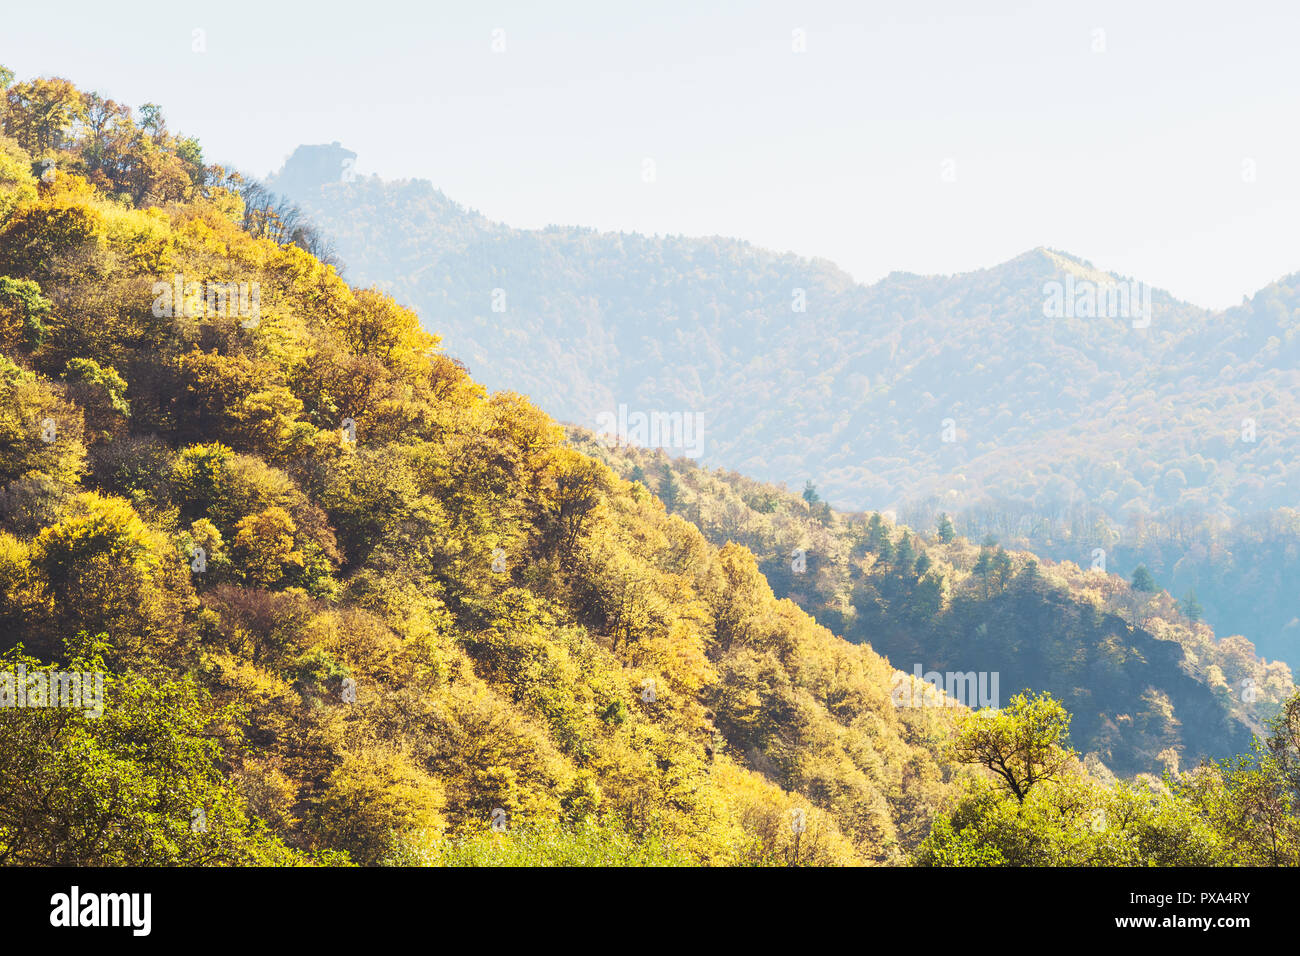 Sunny scene colorful mountains autumn landscape. View of the valley with yellow trees and peaks. Colorful scene of the autumn season. Stock Photo